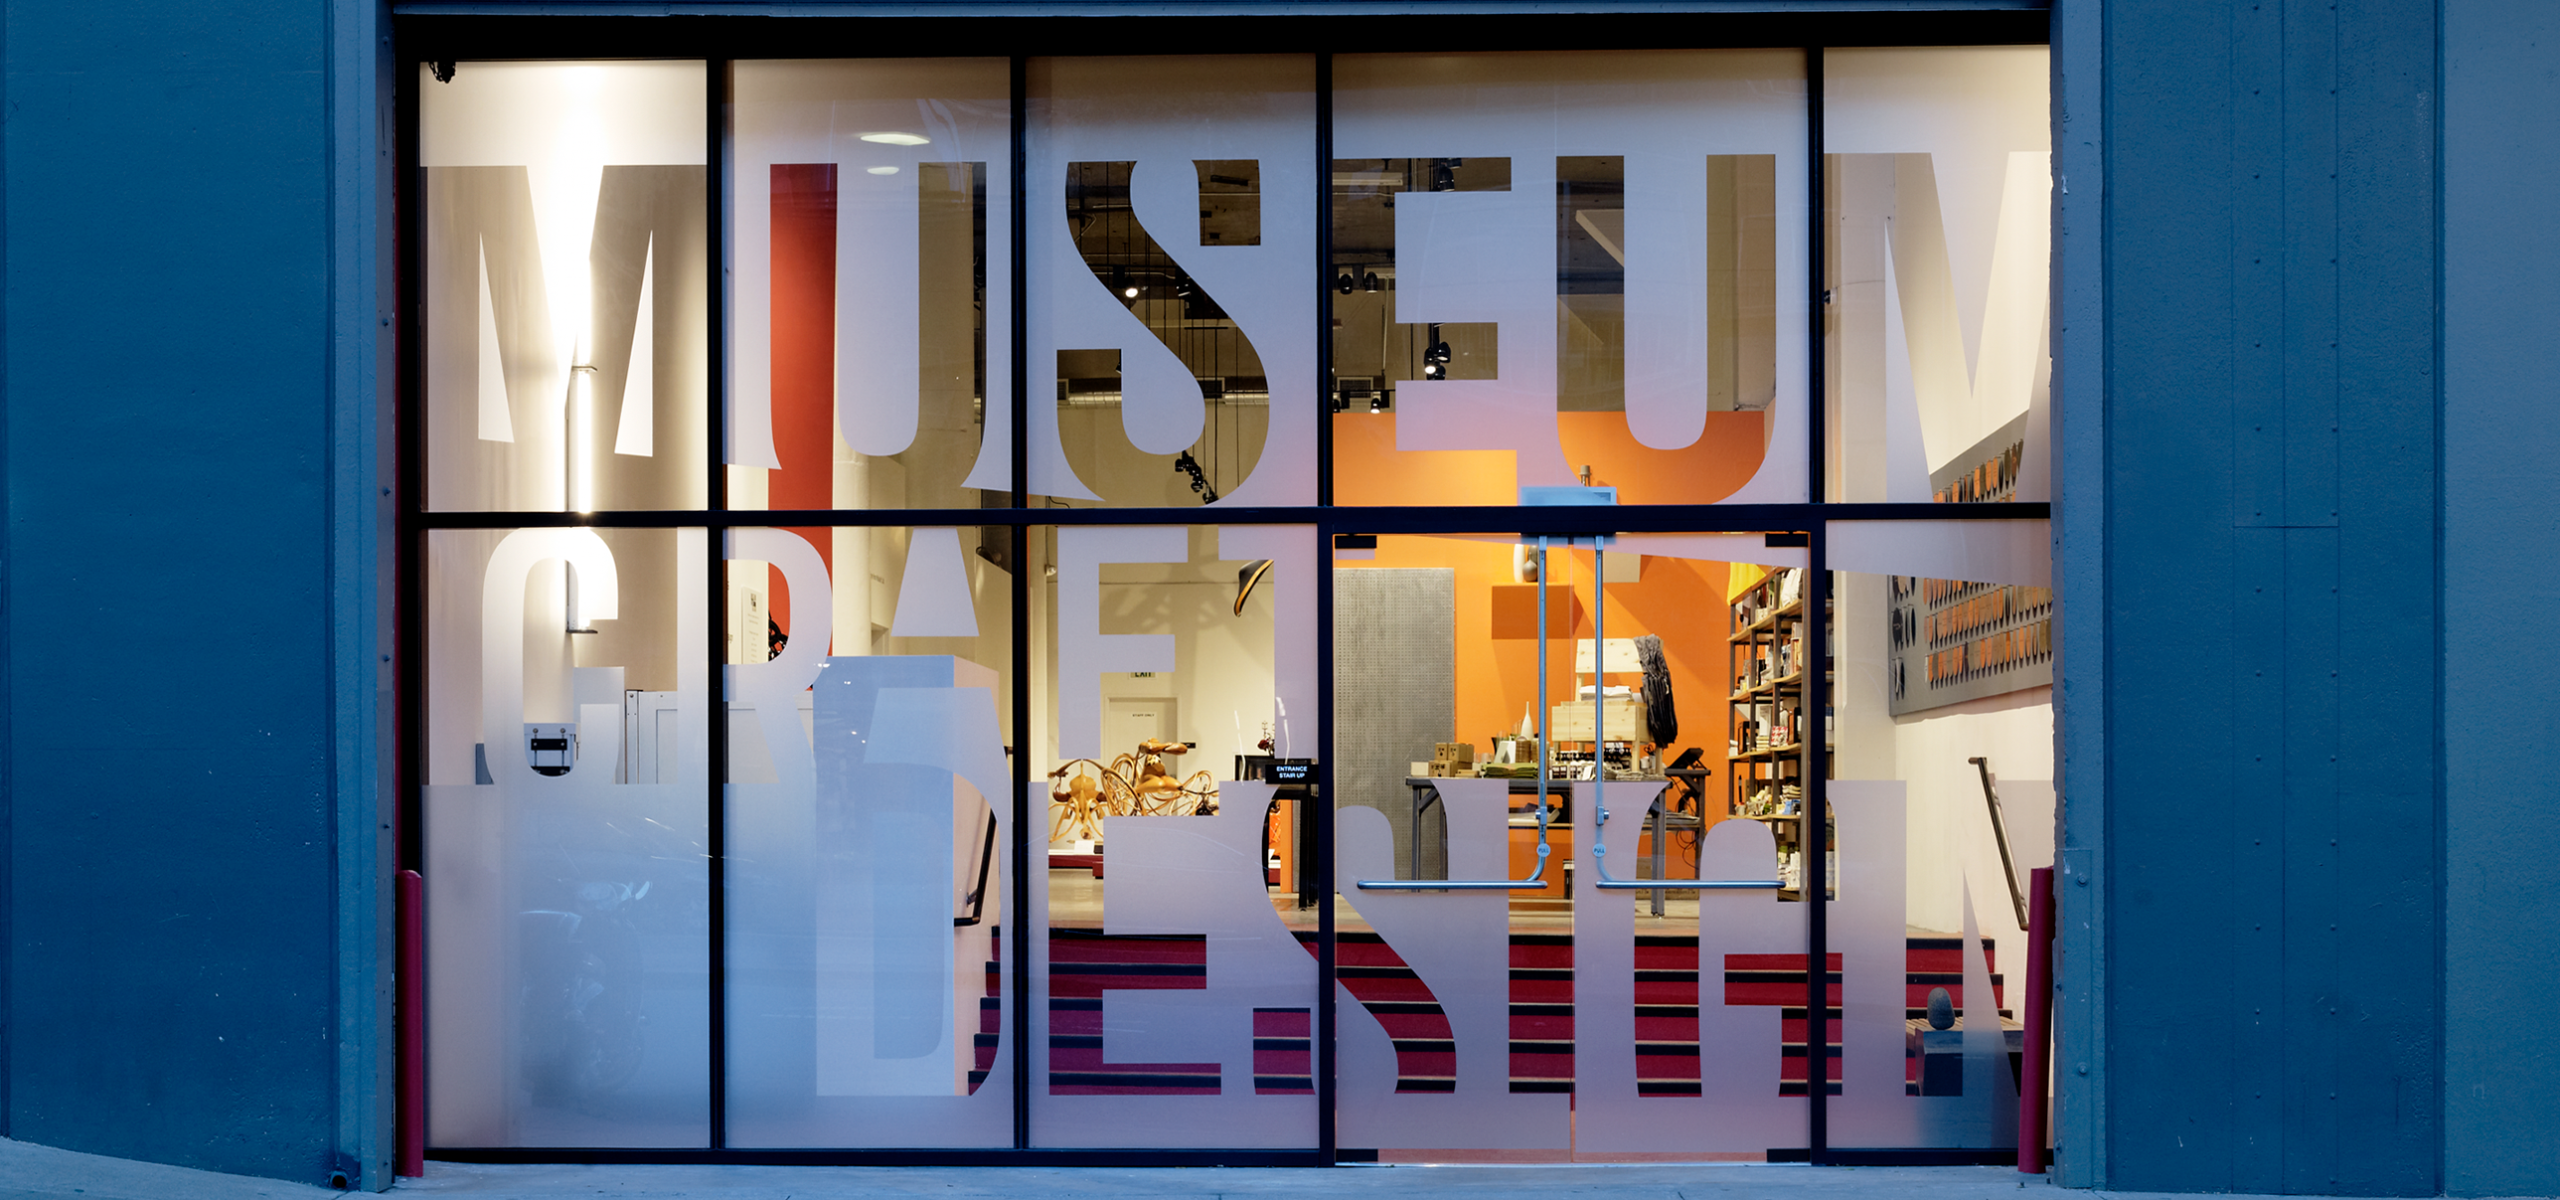 Street view shot of the museum of craft and design's window front.